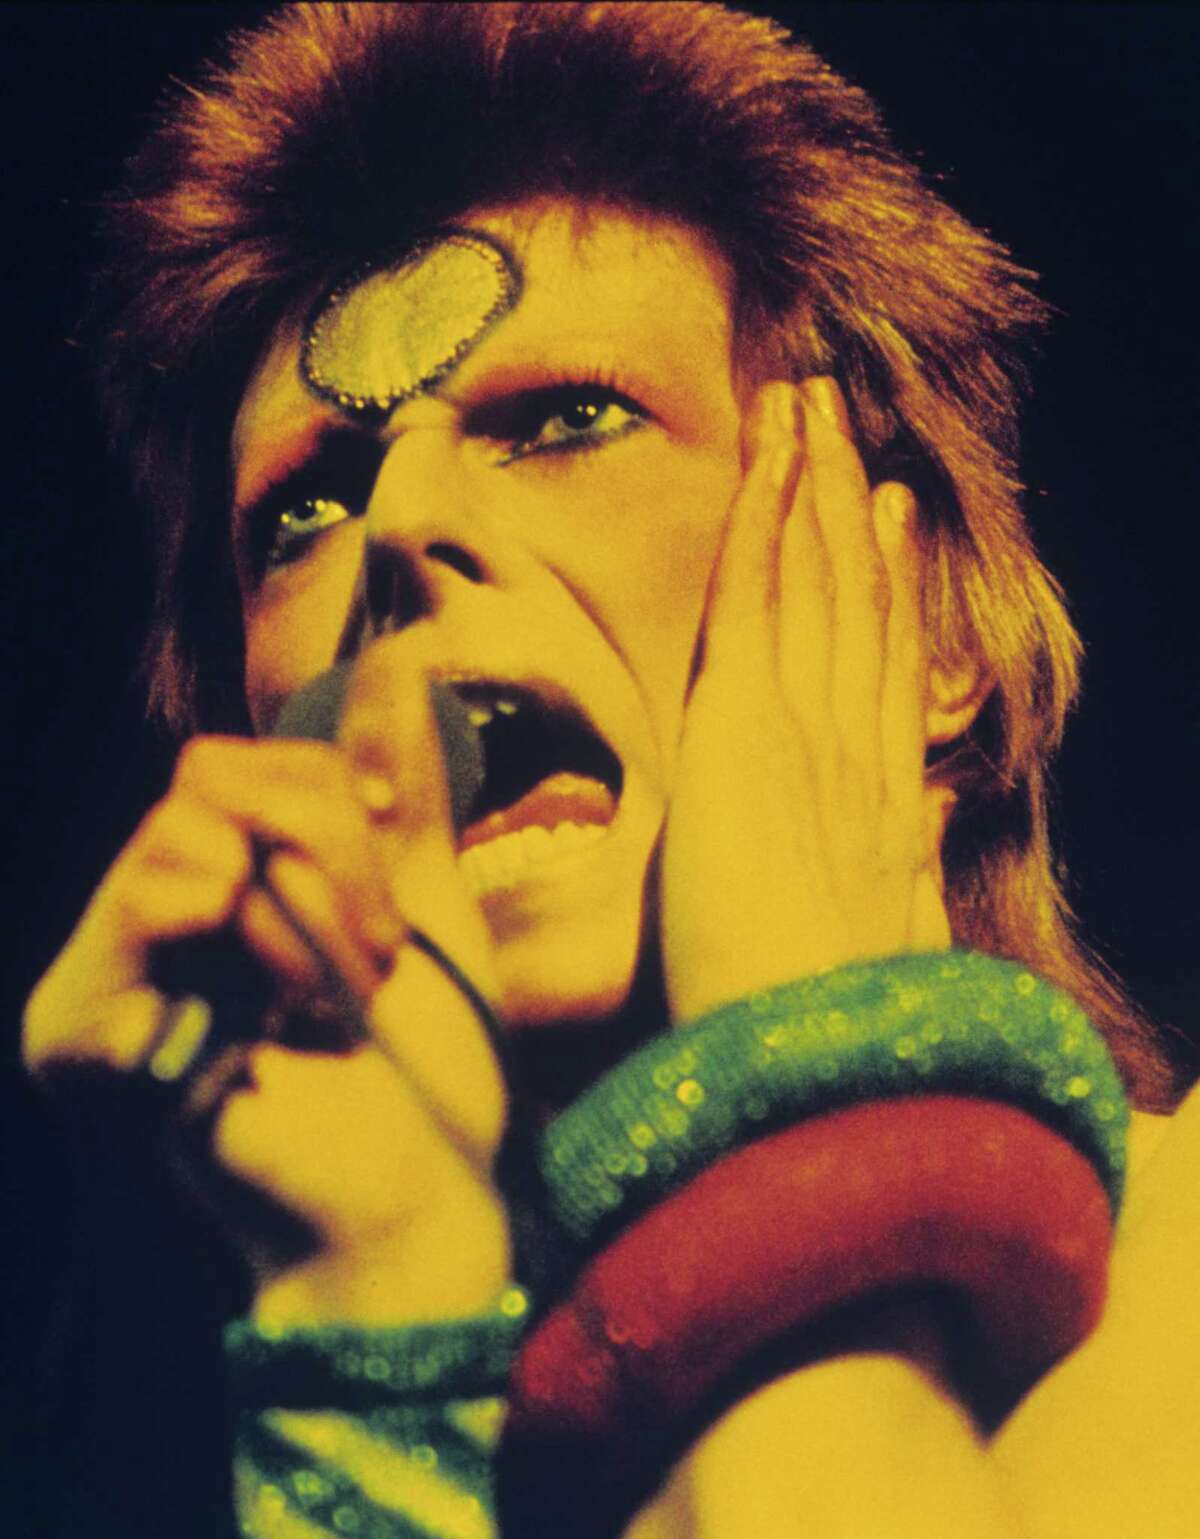 David Bowie on the Ziggy Stardust tour in 1973 in London